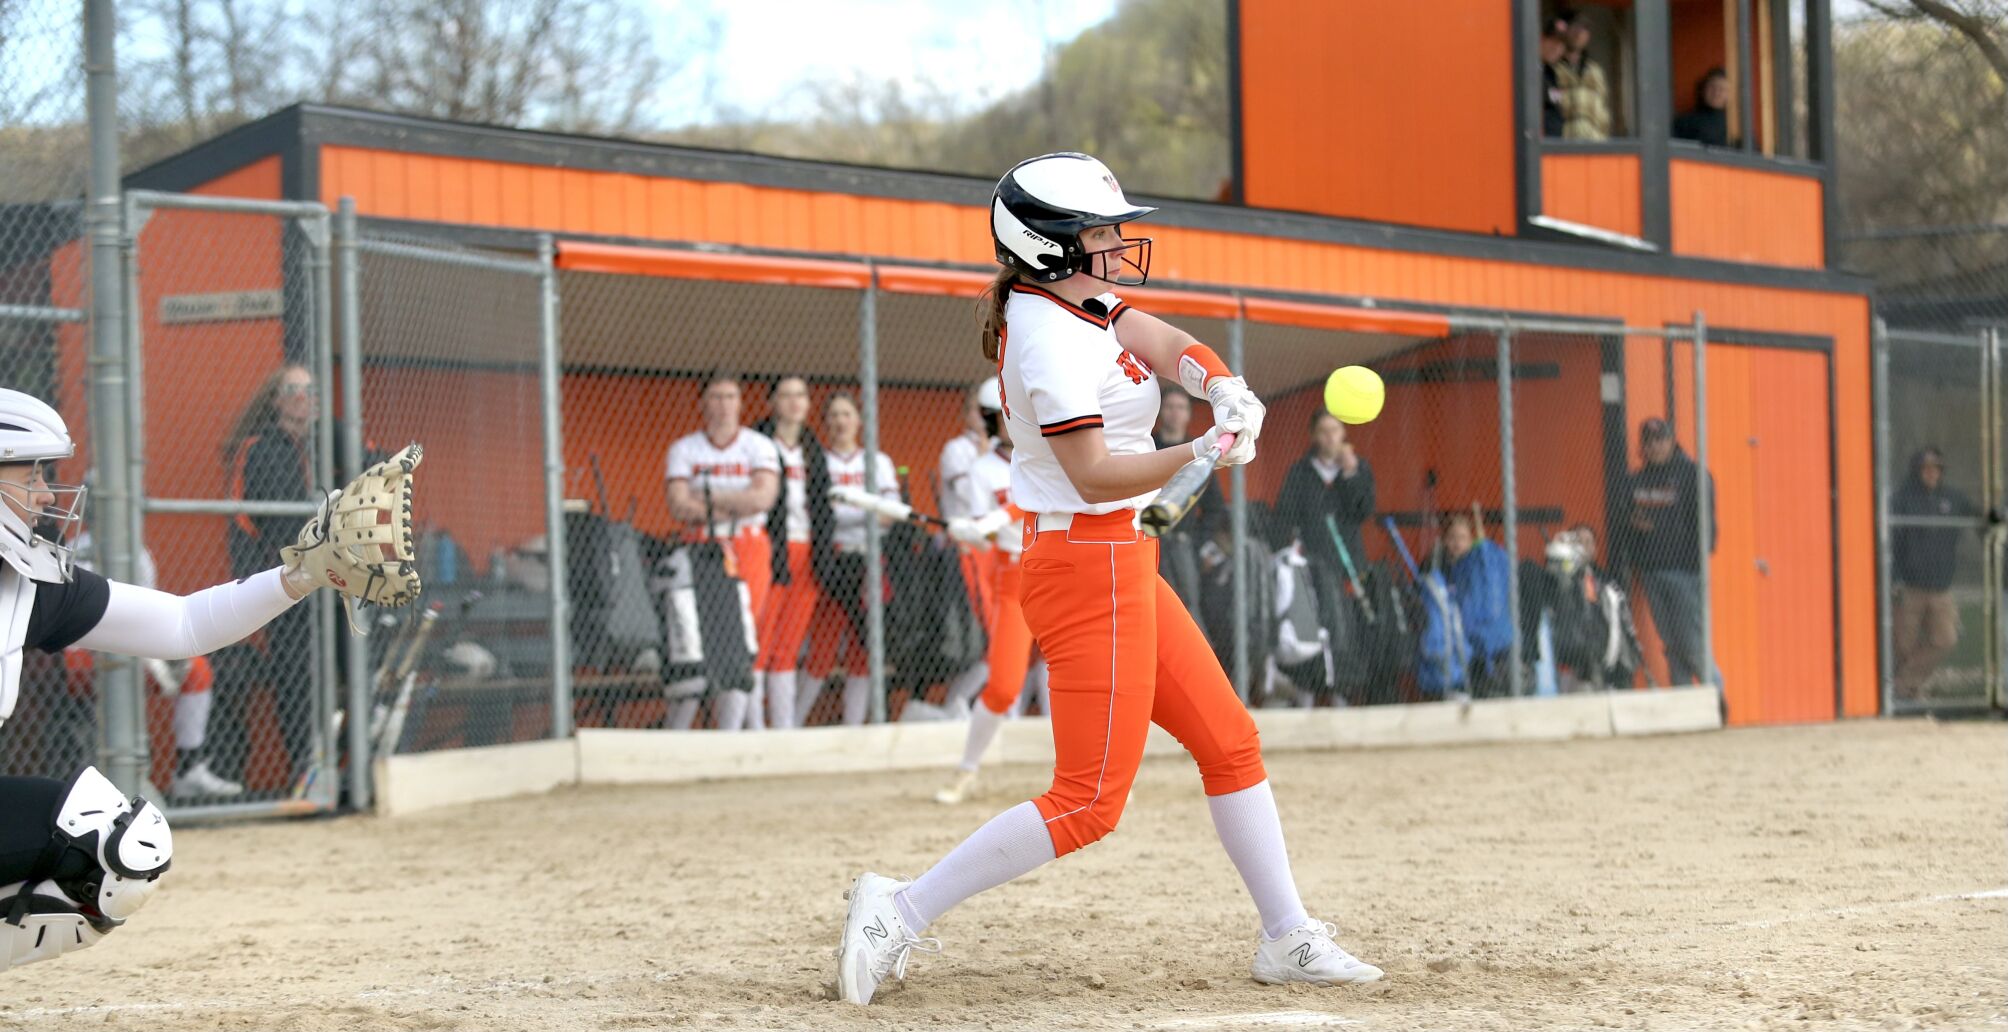 Local sports news: Winona softball loses first game but bounces back for a 6-4 victory